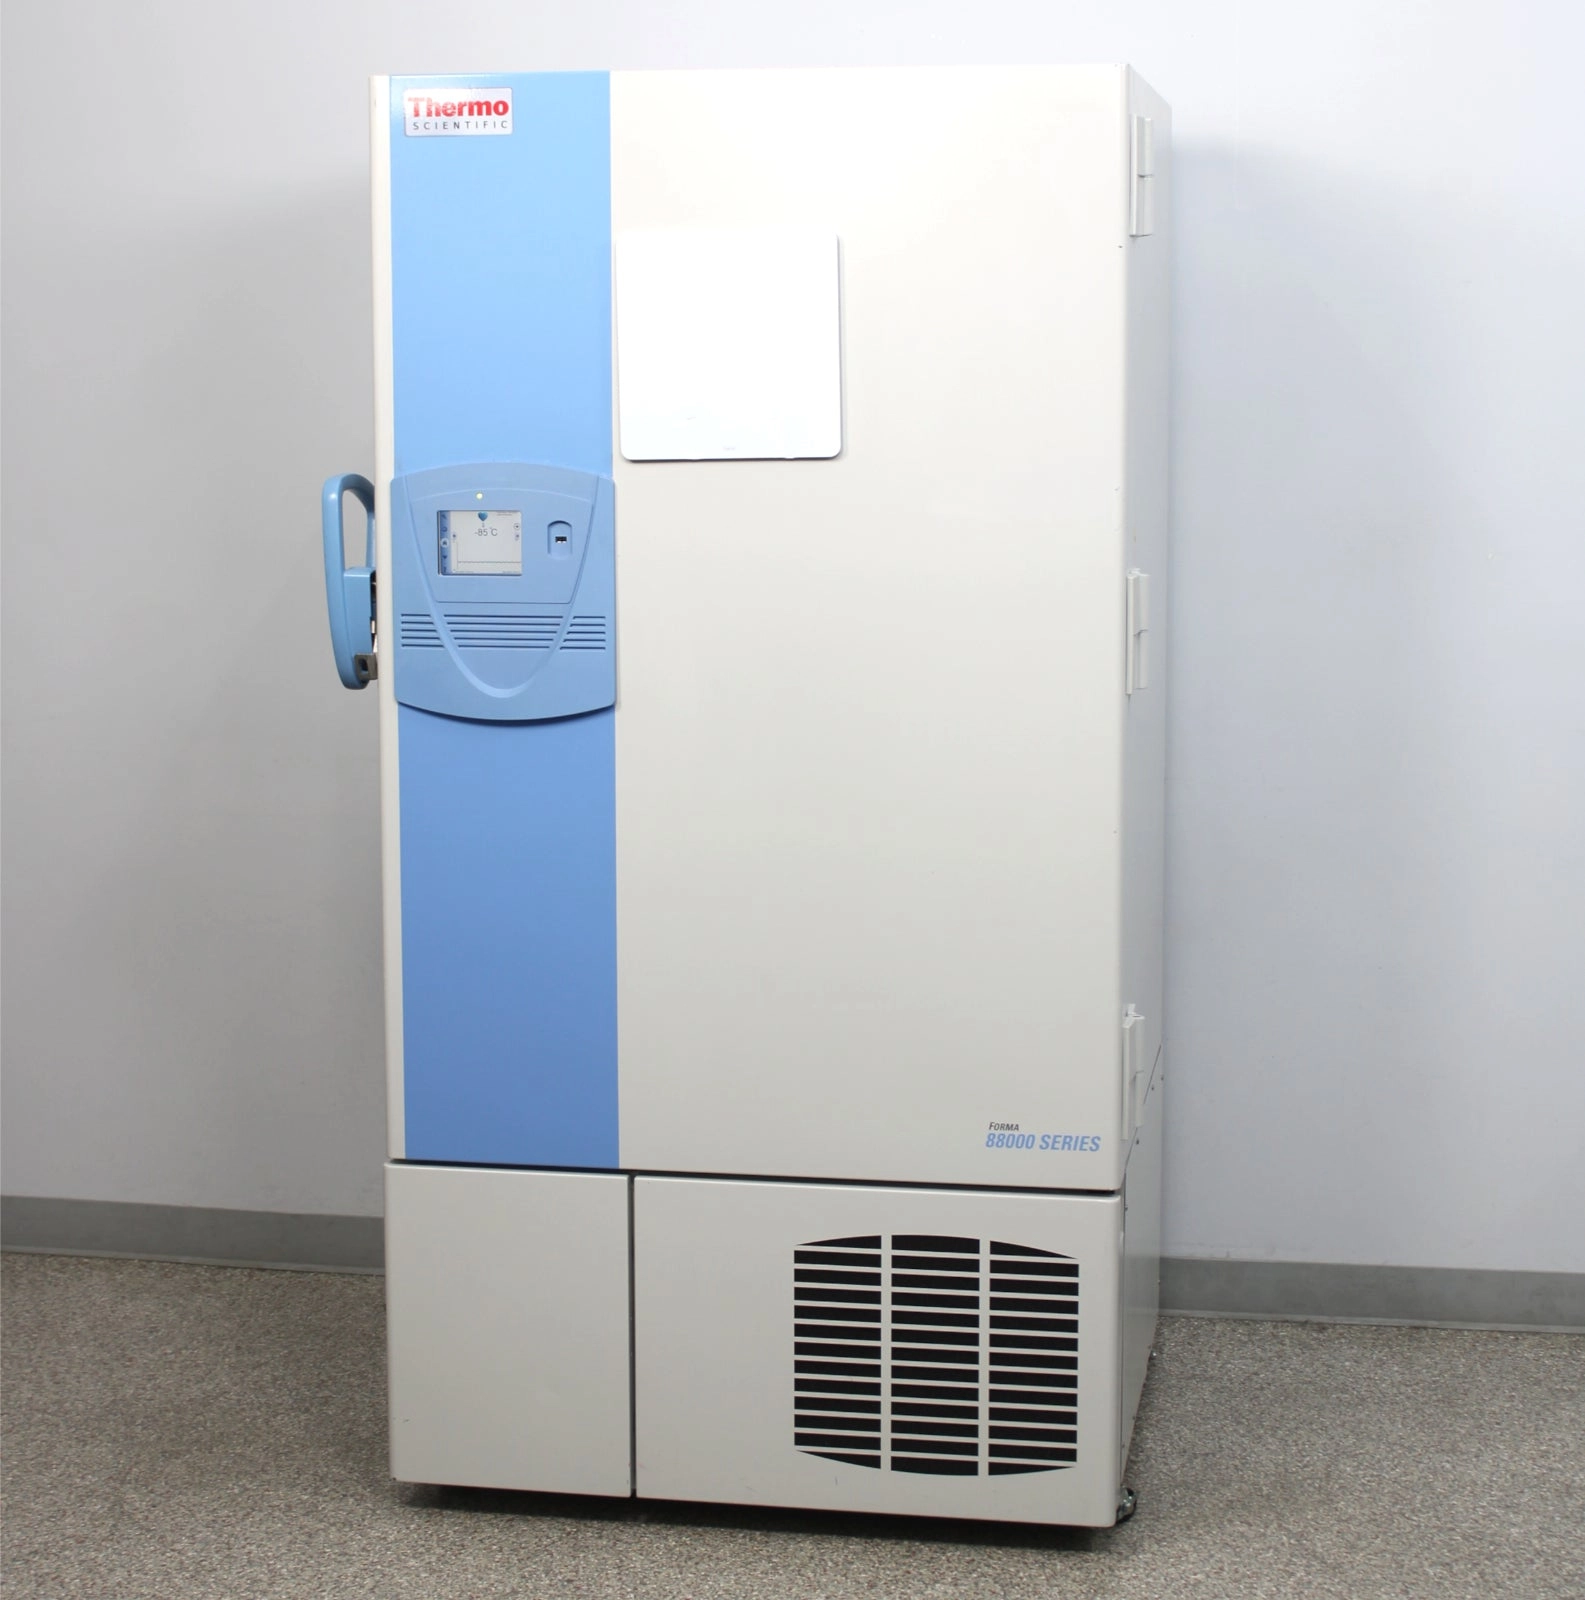 Thermo Forma 88000 Series -86C 88600D Upright ULT Ultra-Low Temperature Freezer